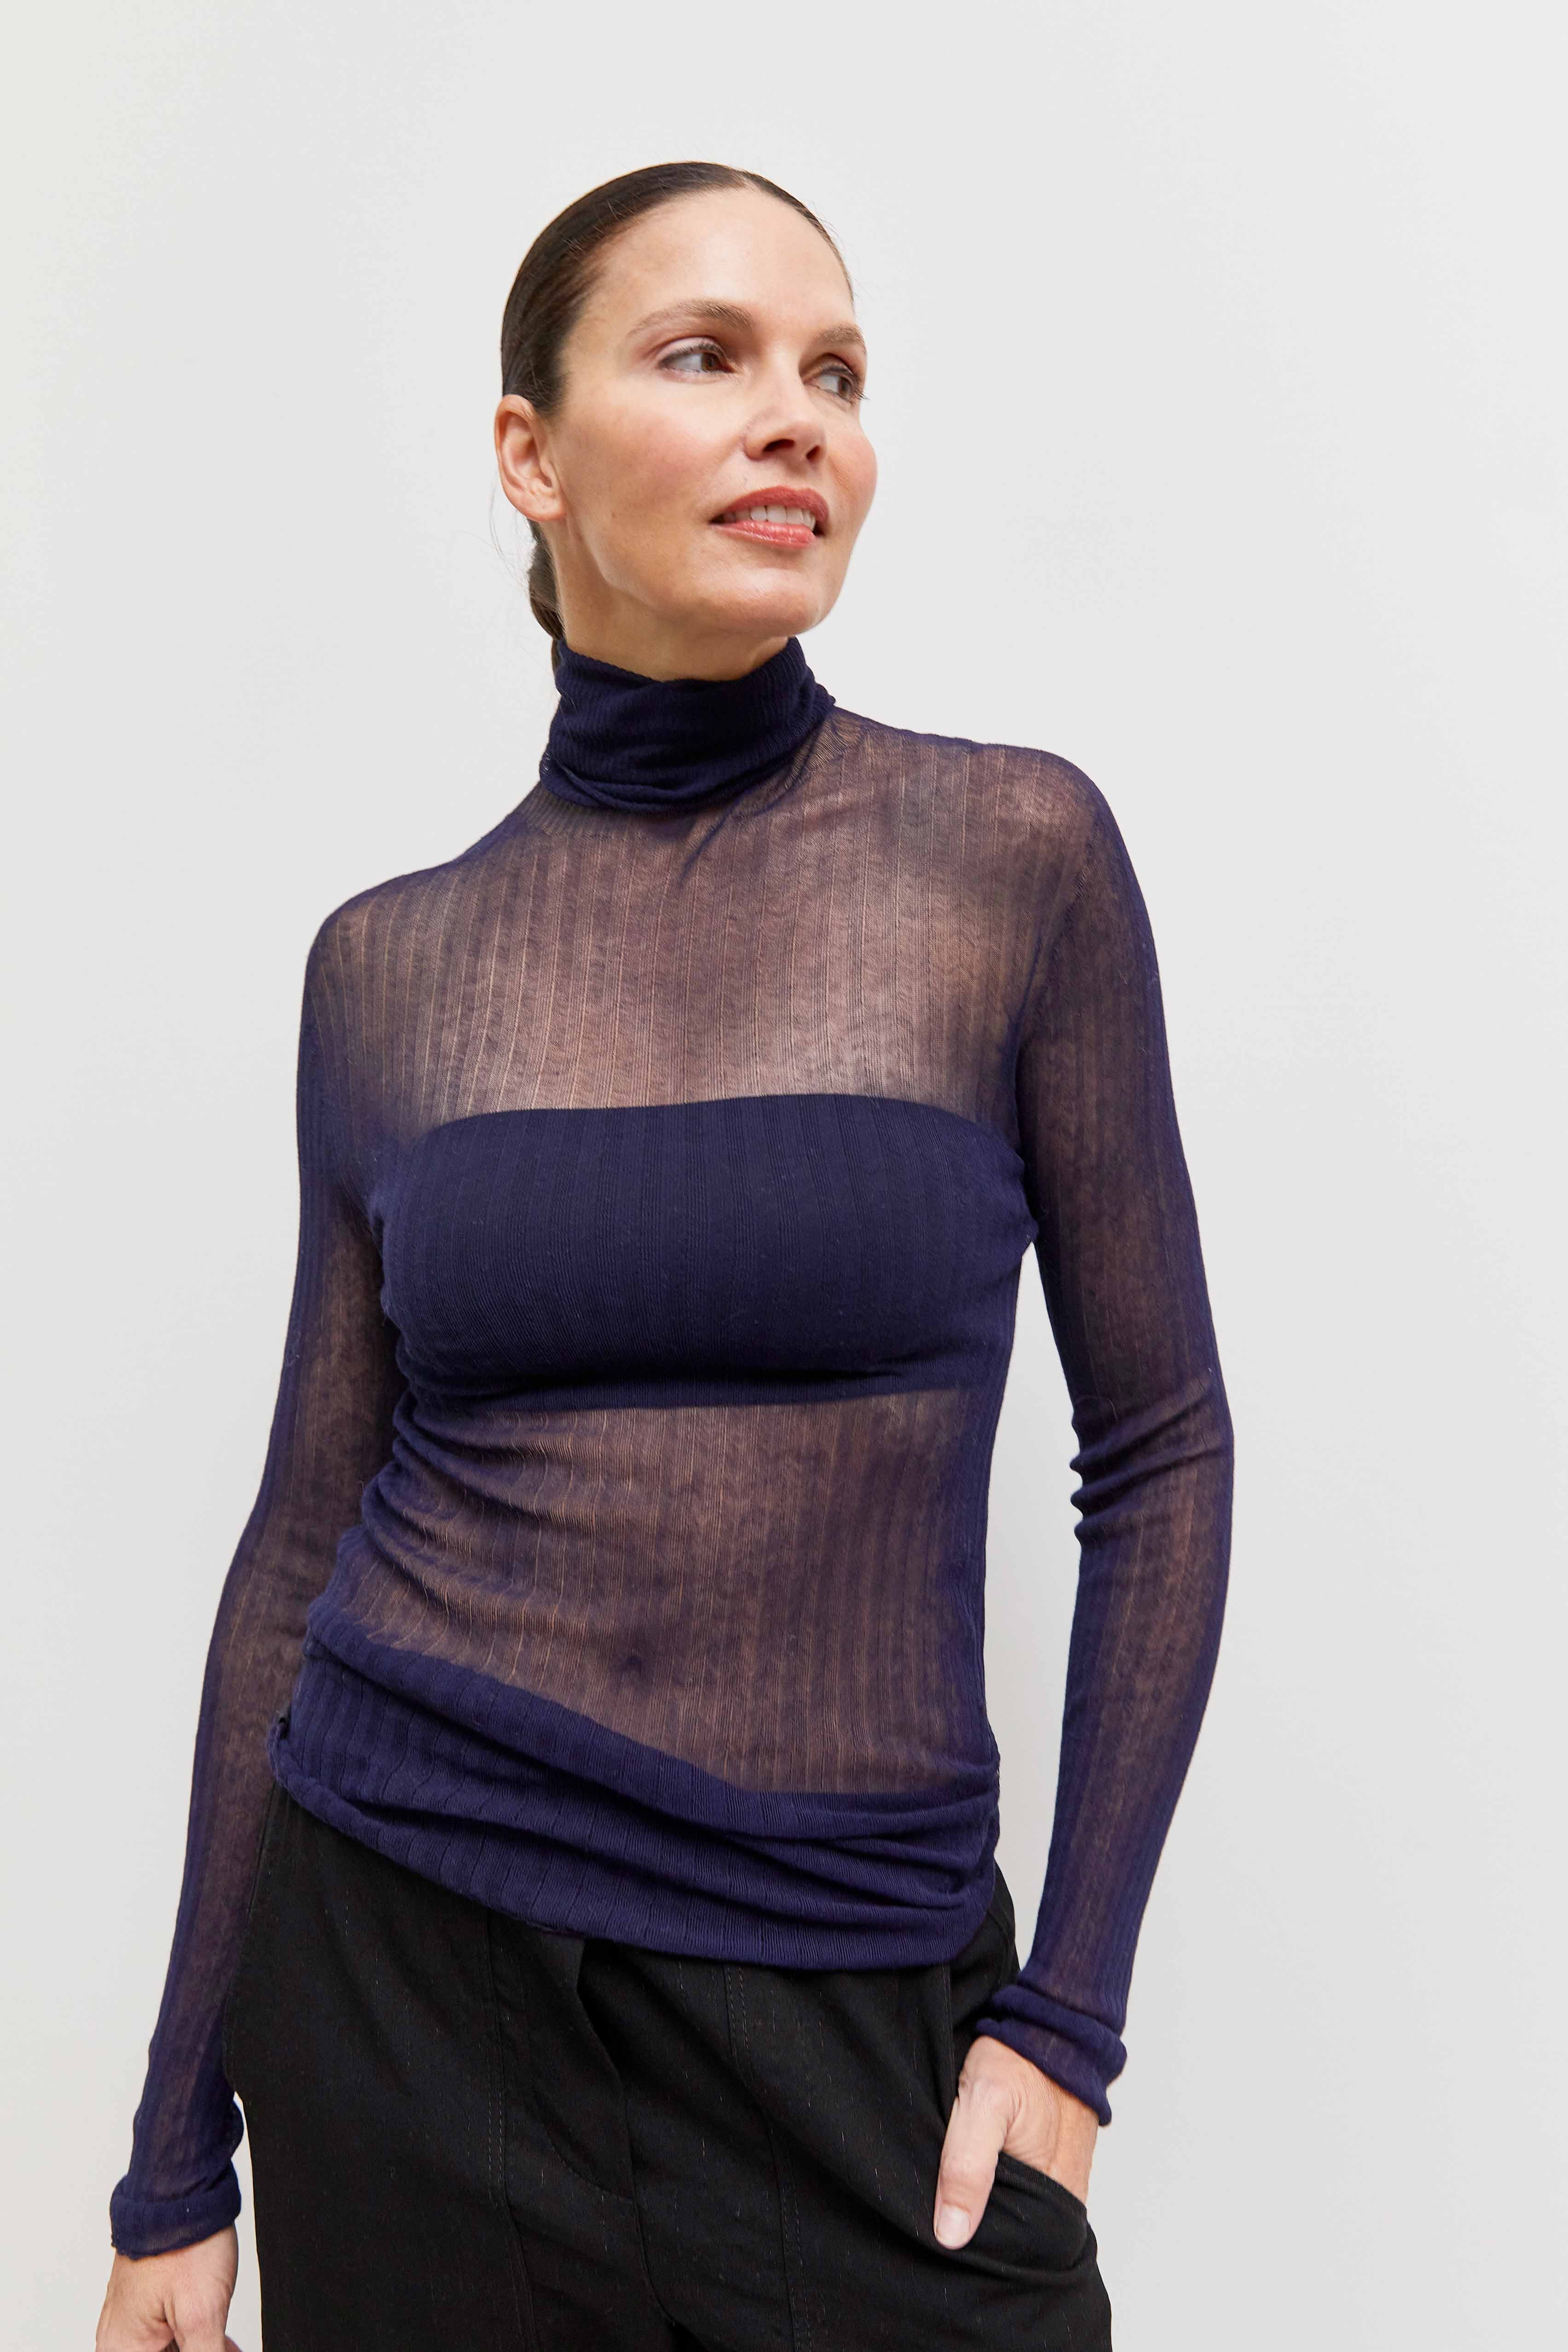 byfreer's standard issue cotton tulle tops.